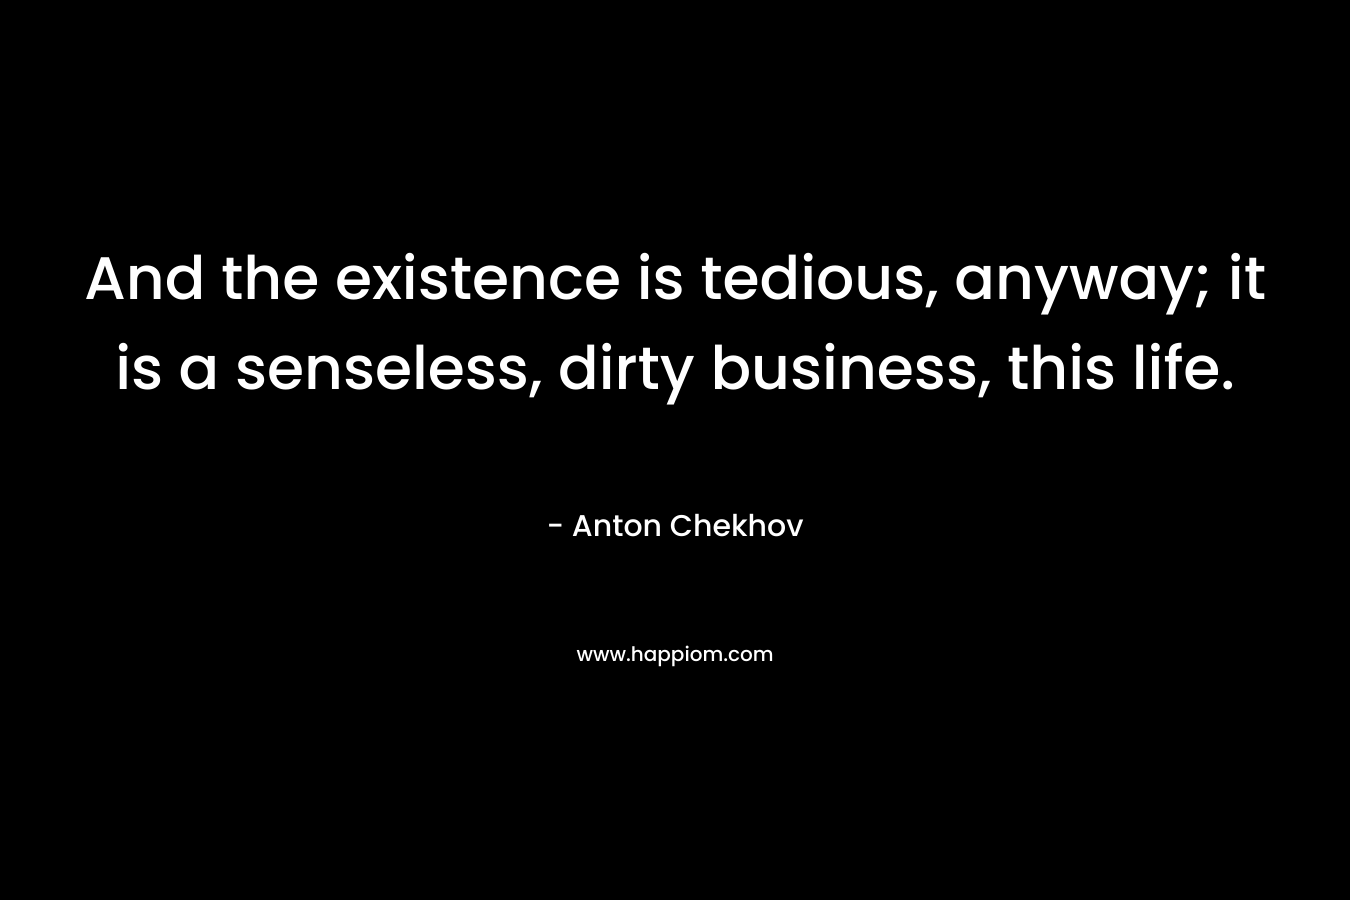 And the existence is tedious, anyway; it is a senseless, dirty business, this life.